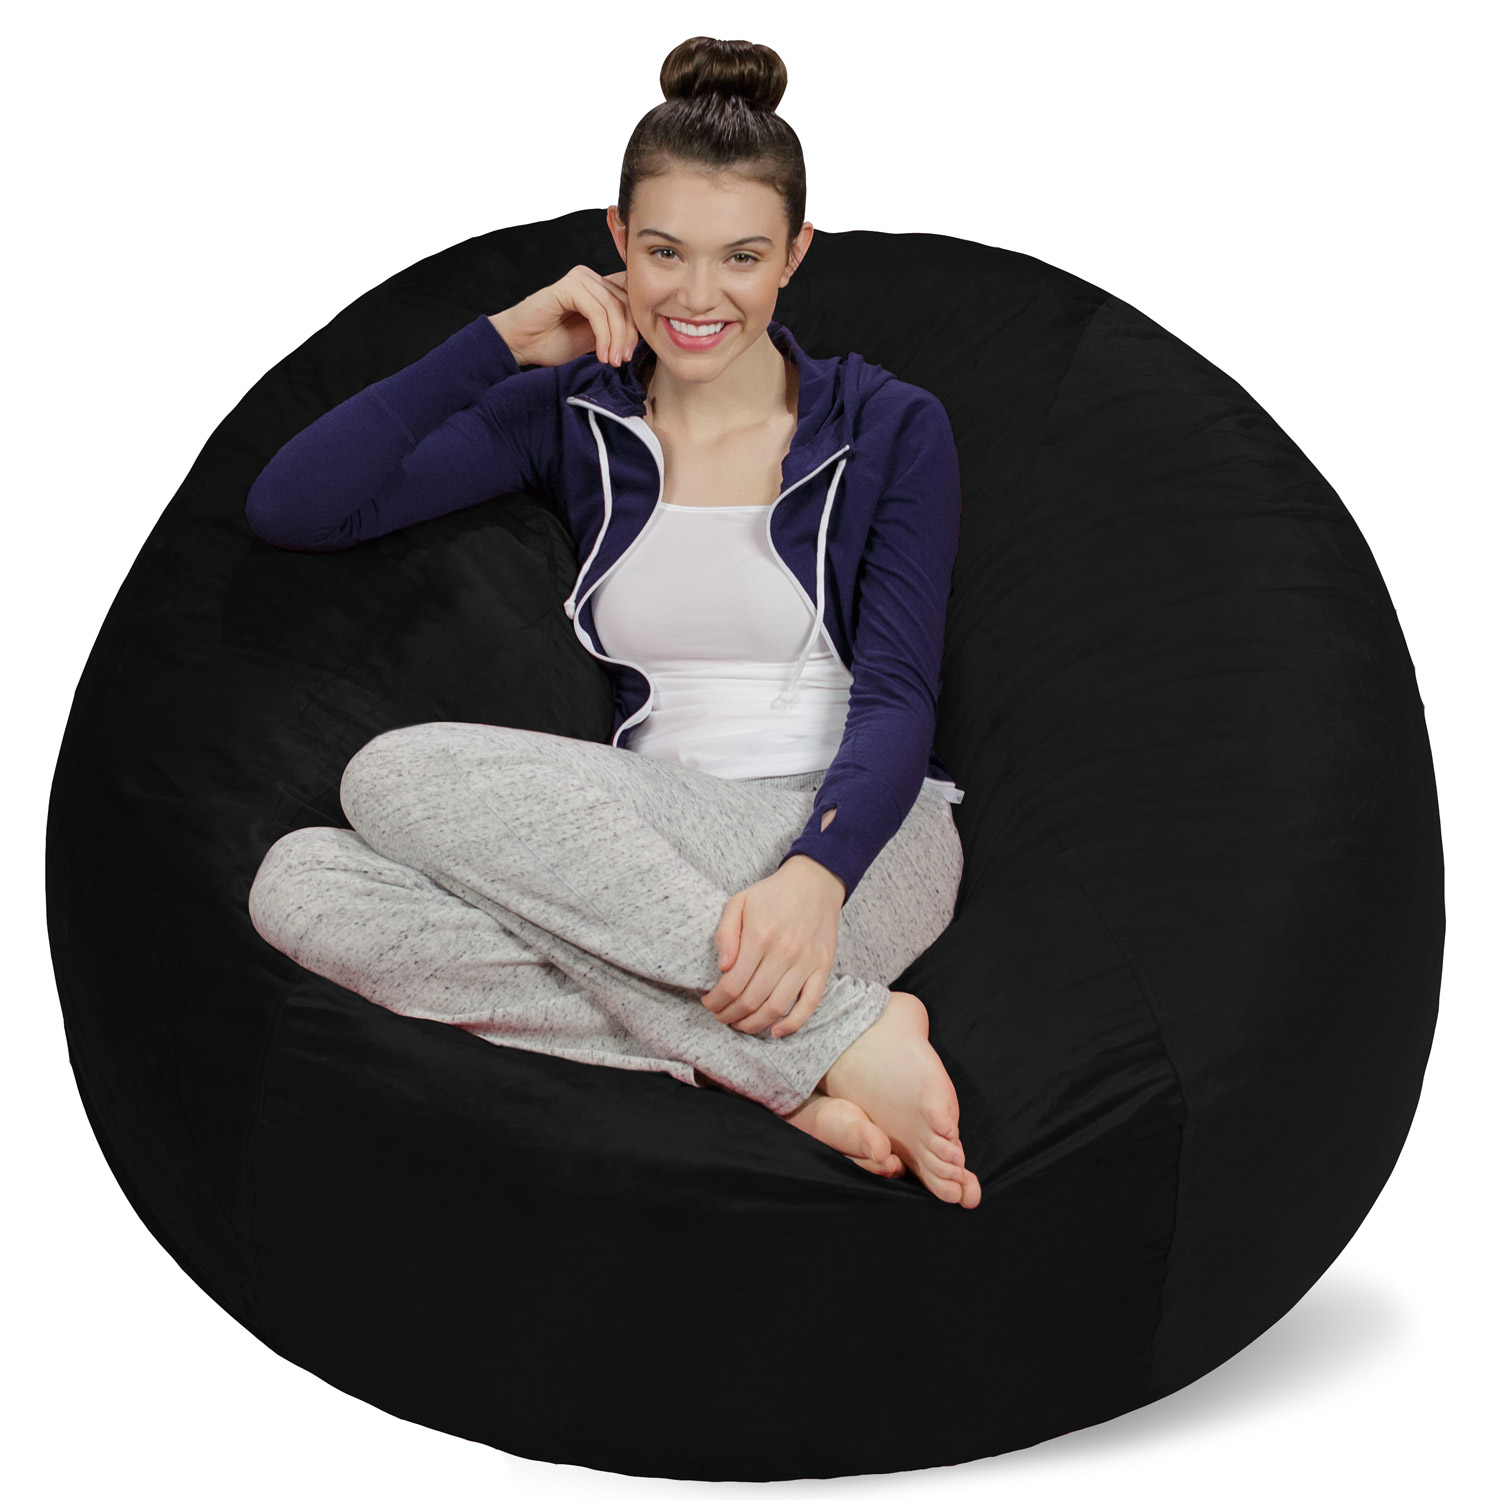 Sofa Sack Bean Bag Chair, Memory Foam Lounger with Microsuede Cover, Kids, Adults, 5 ft, Black - image 1 of 6